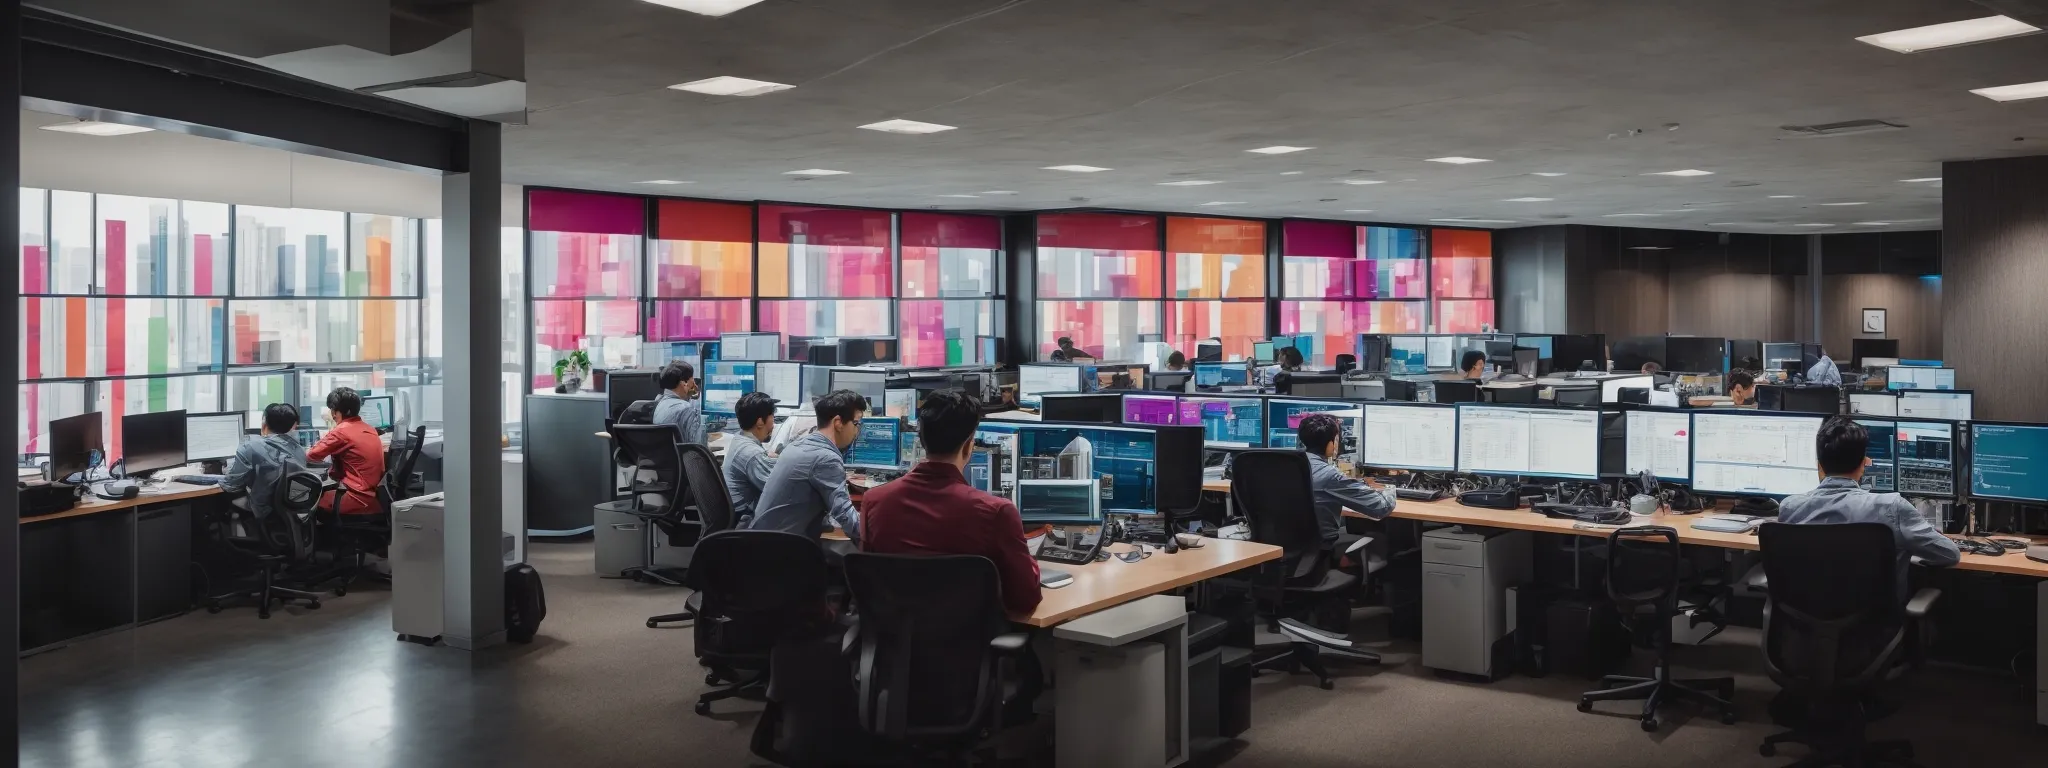 a bustling digital marketing office, with employees intently working on computers displaying colorful graphs and marketing analytics.